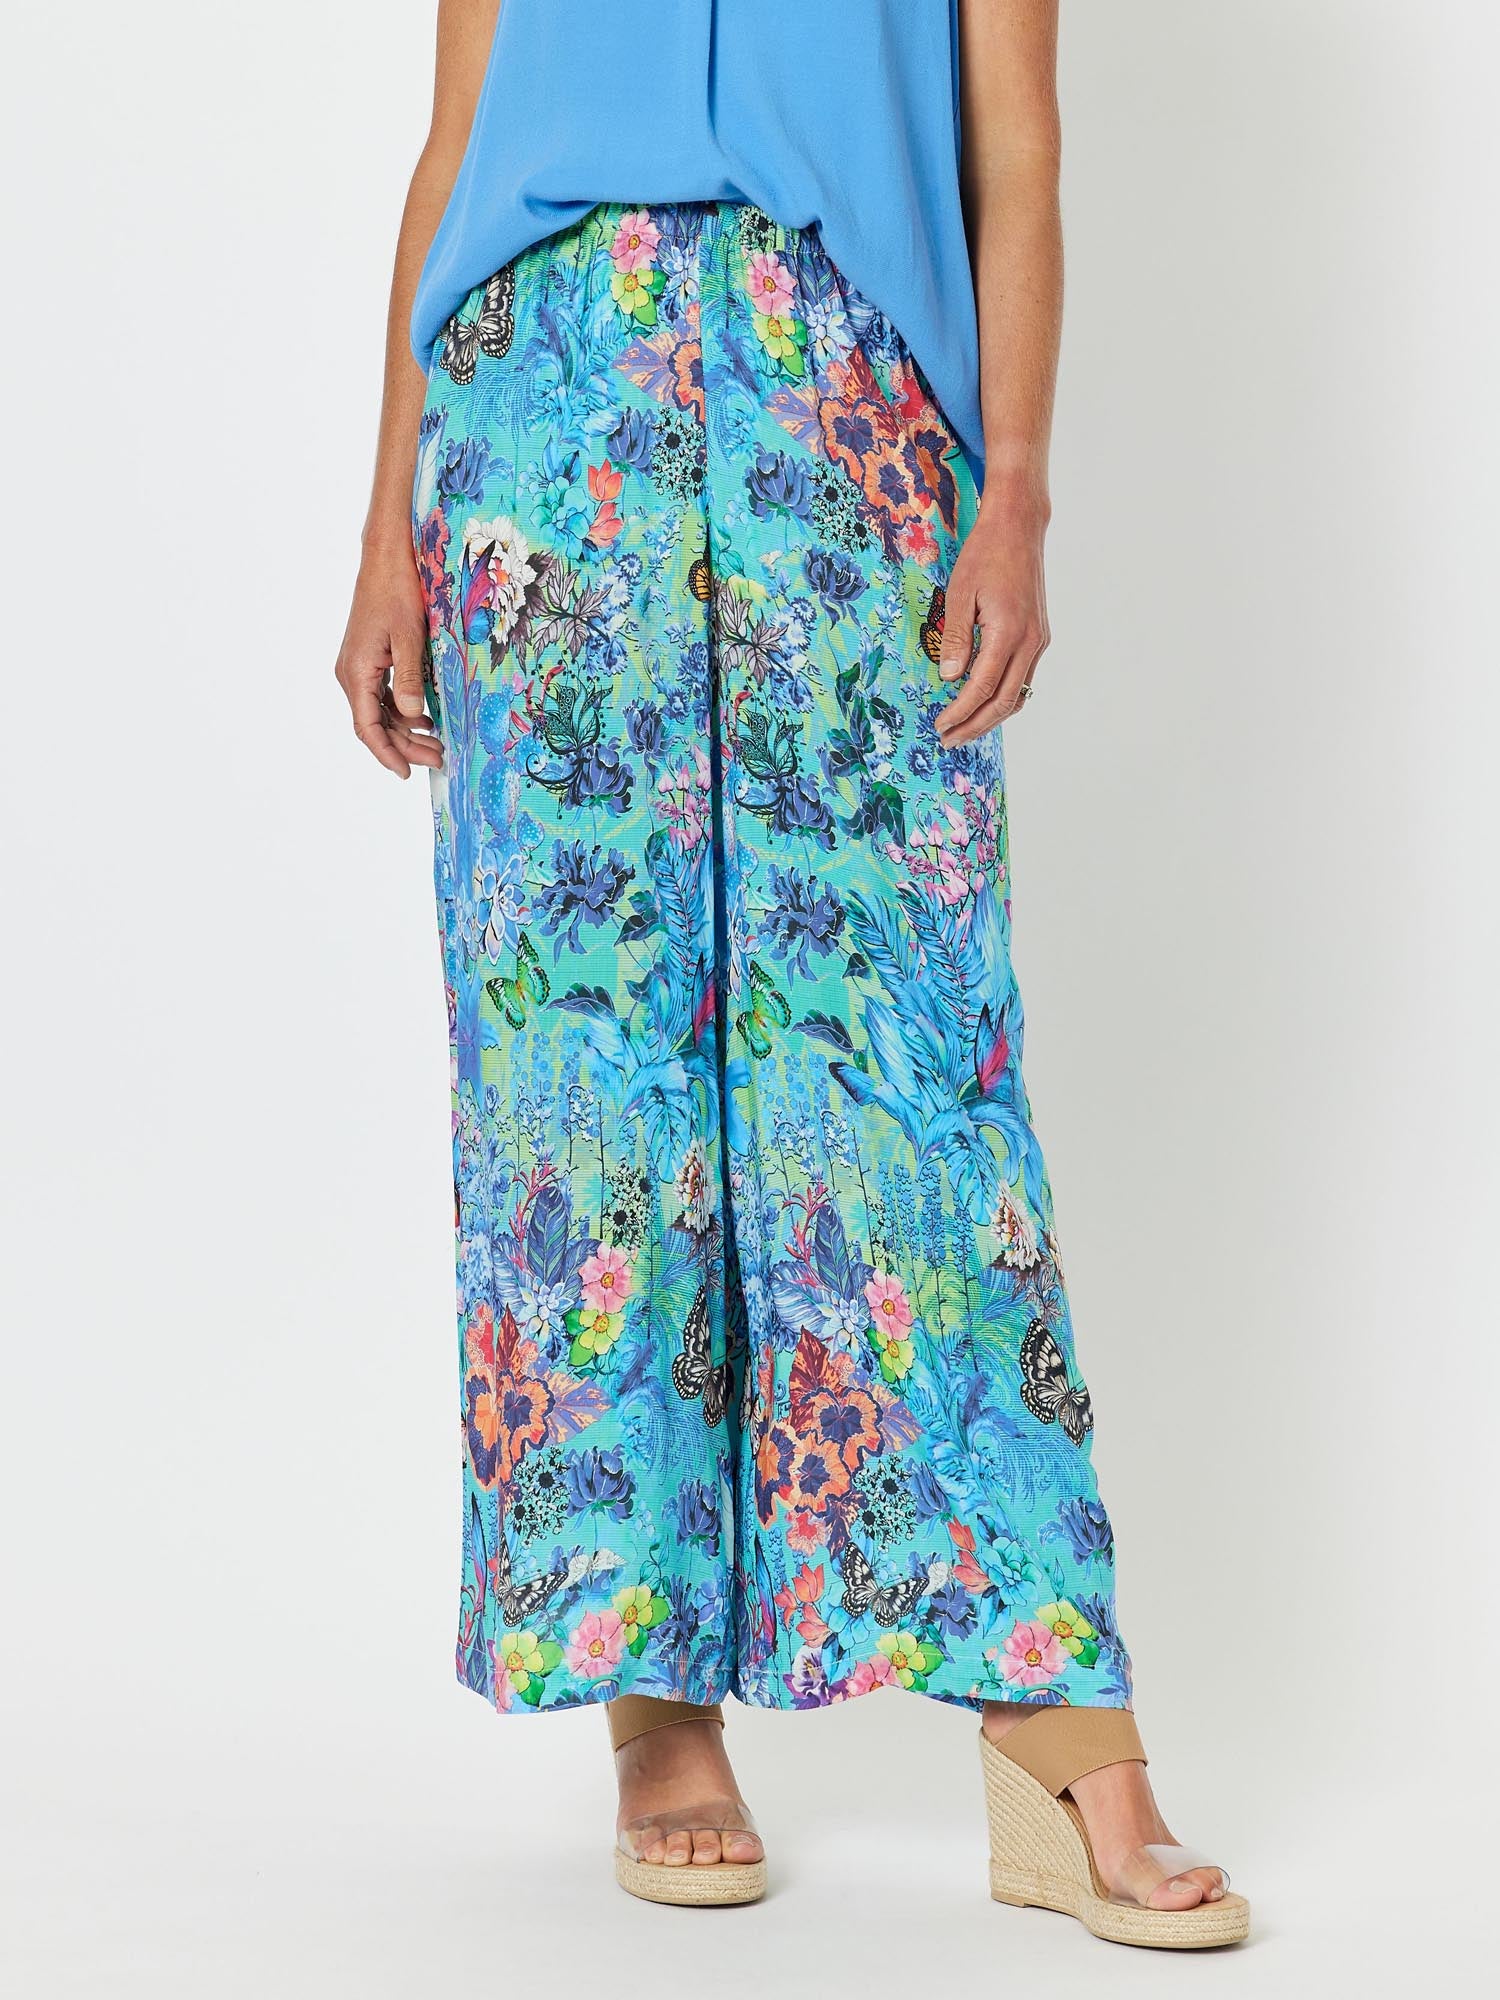 Garden Party Print Wide Leg Pull On Pant - Multi